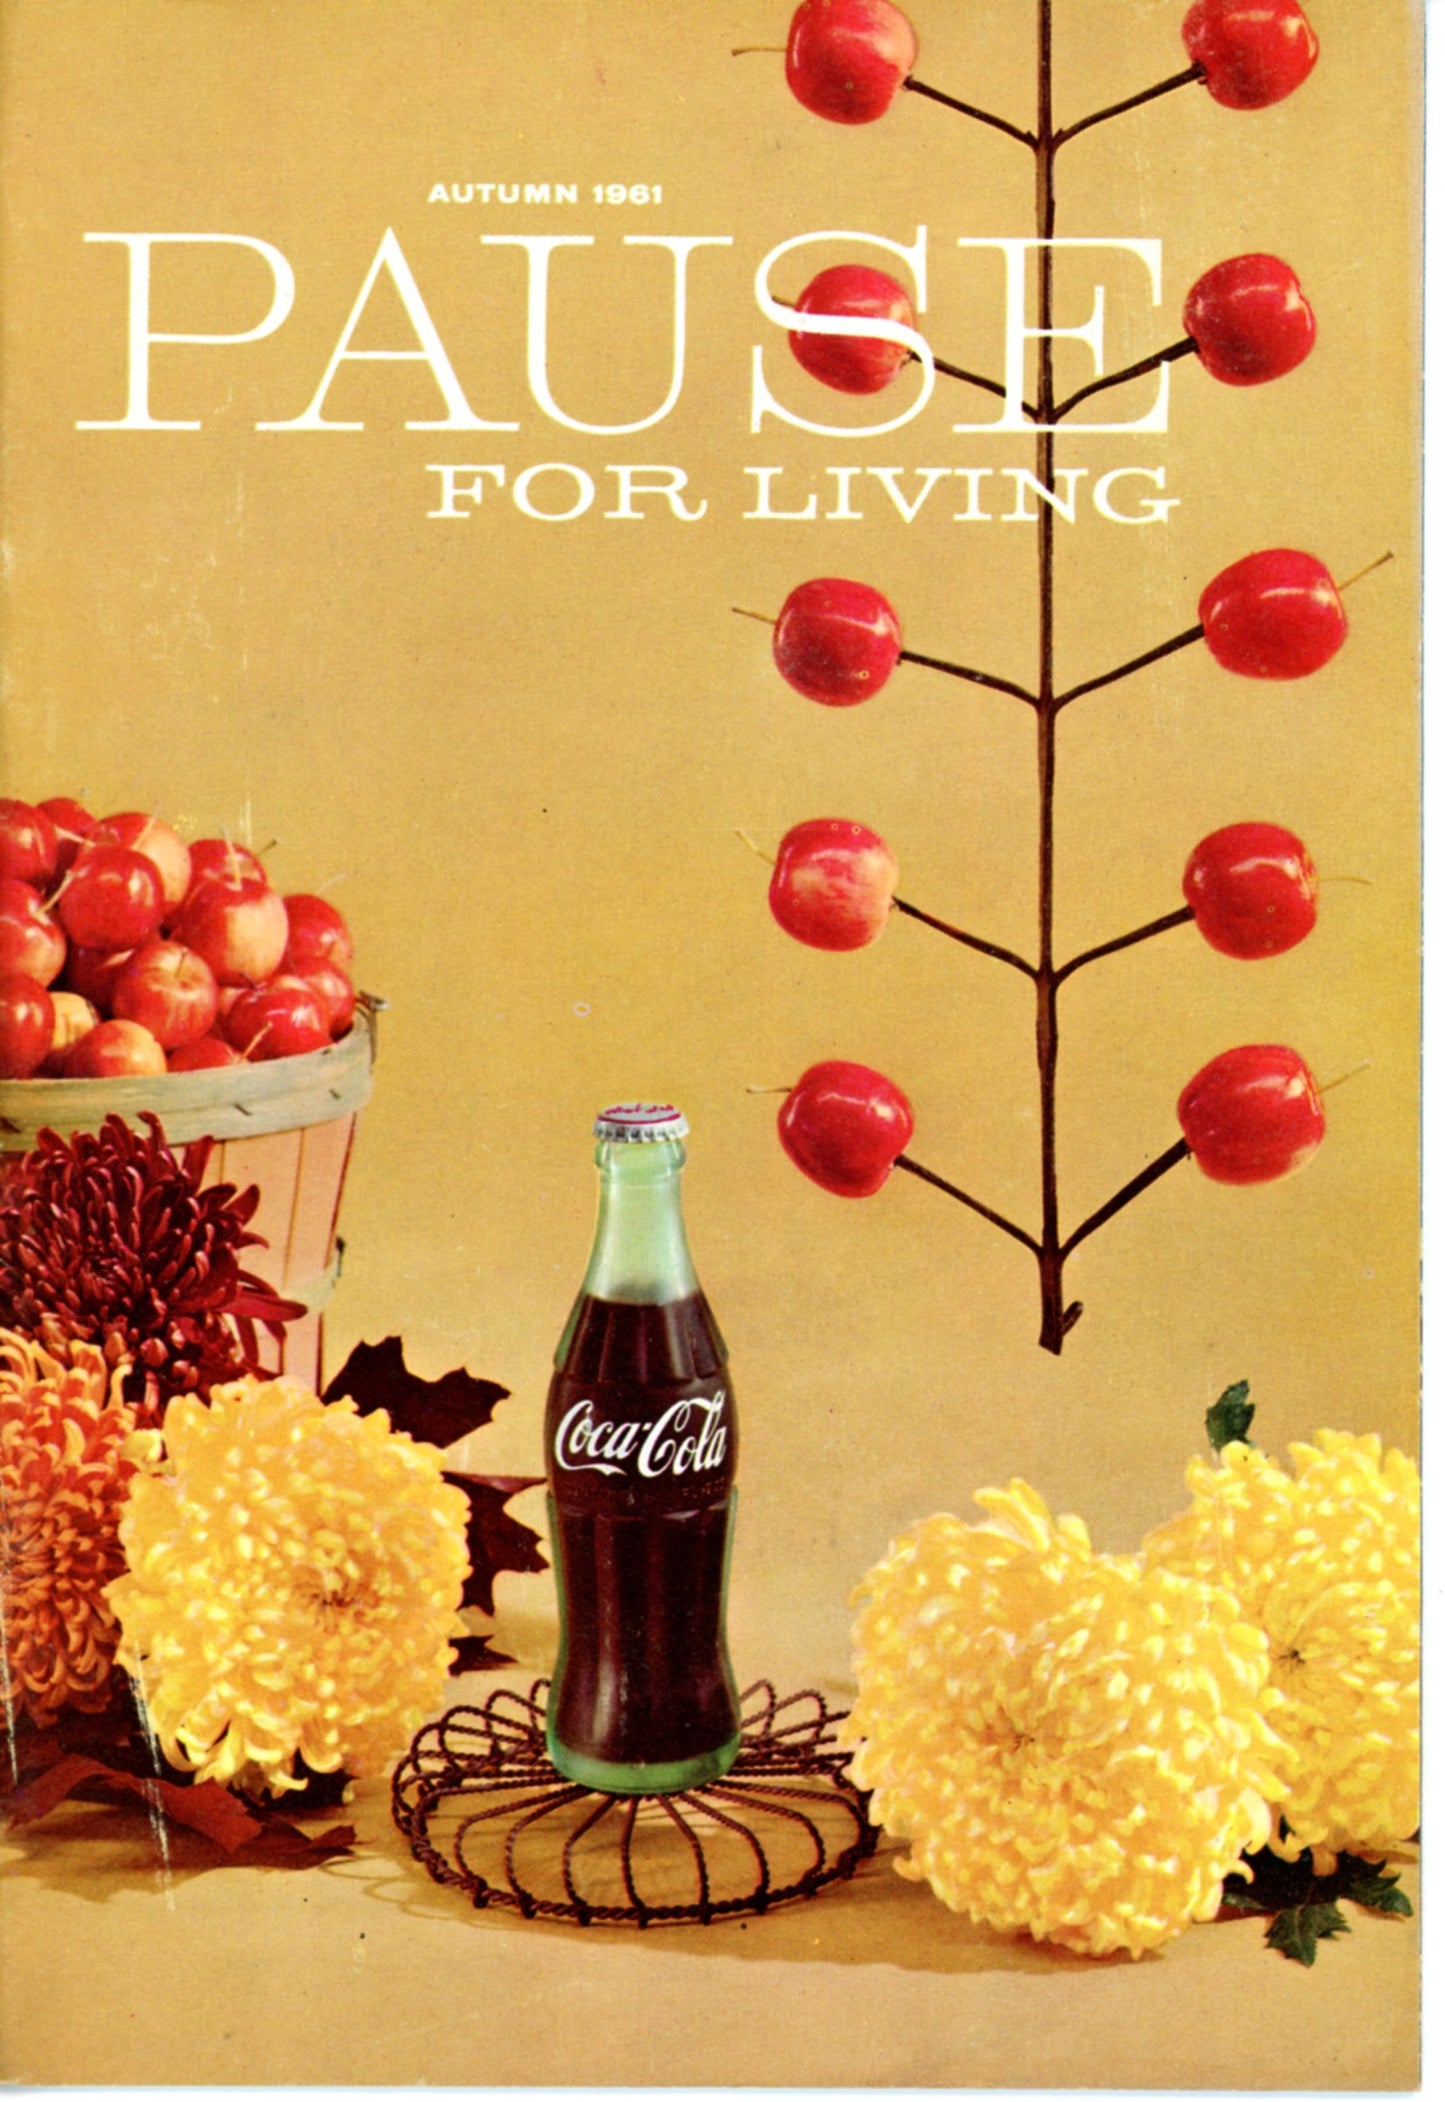 PAUSE FOR LIVING Seasonal Coca Cola Booklets from 1961 Full Year | Set of Four